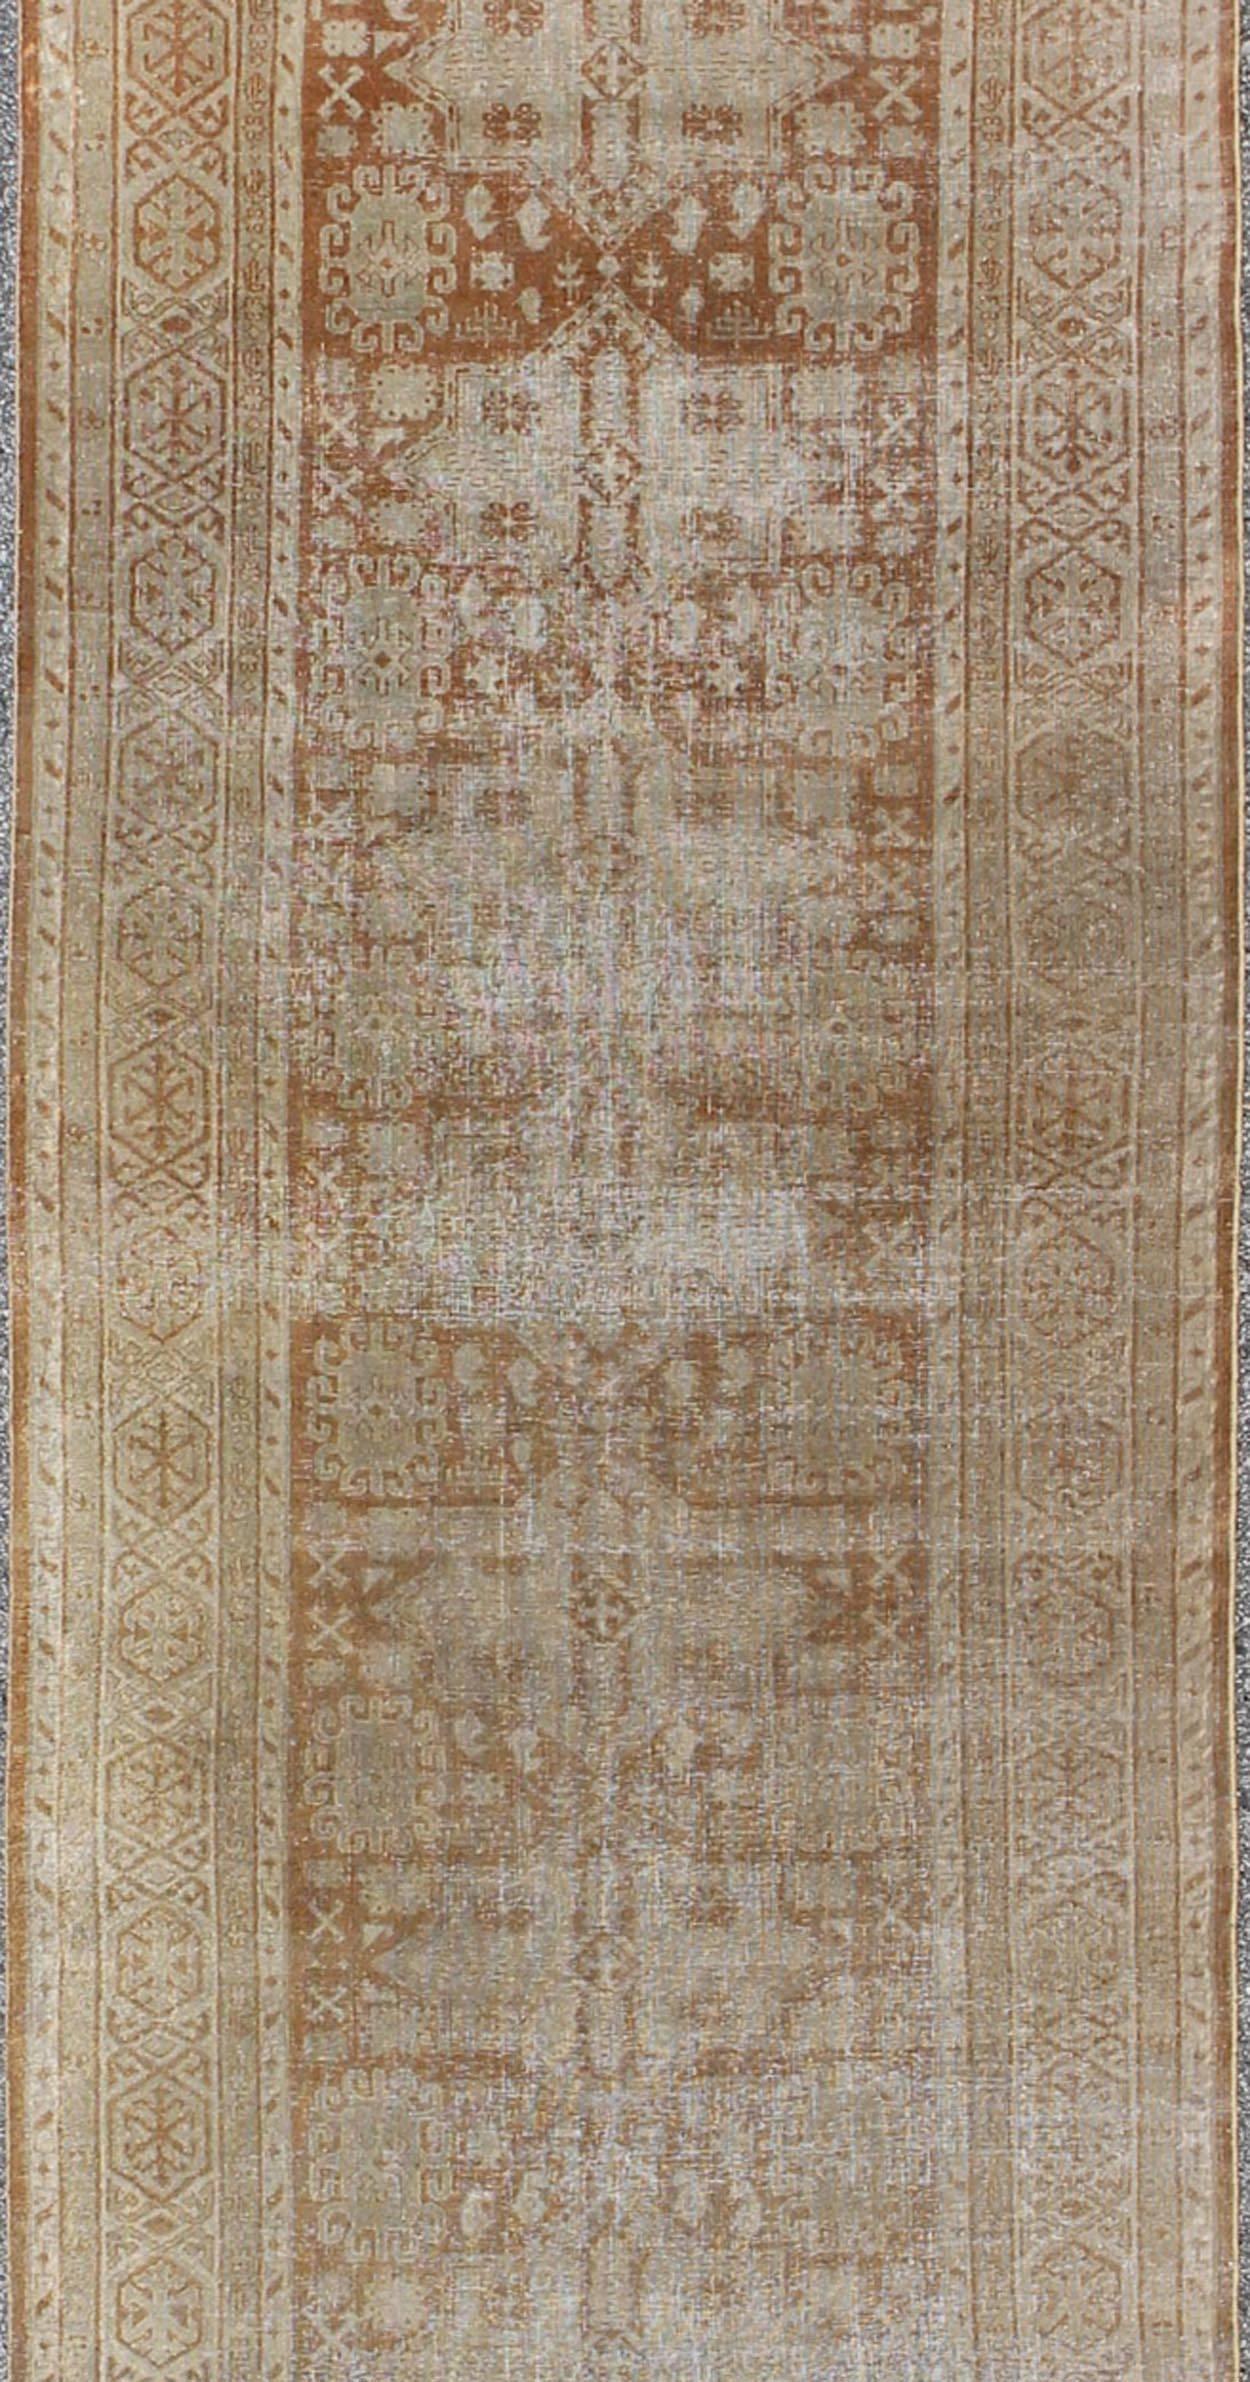 Indian Long Distressed Antique Amritsar Runner in Nude, Taupe, Camel and Neutrals